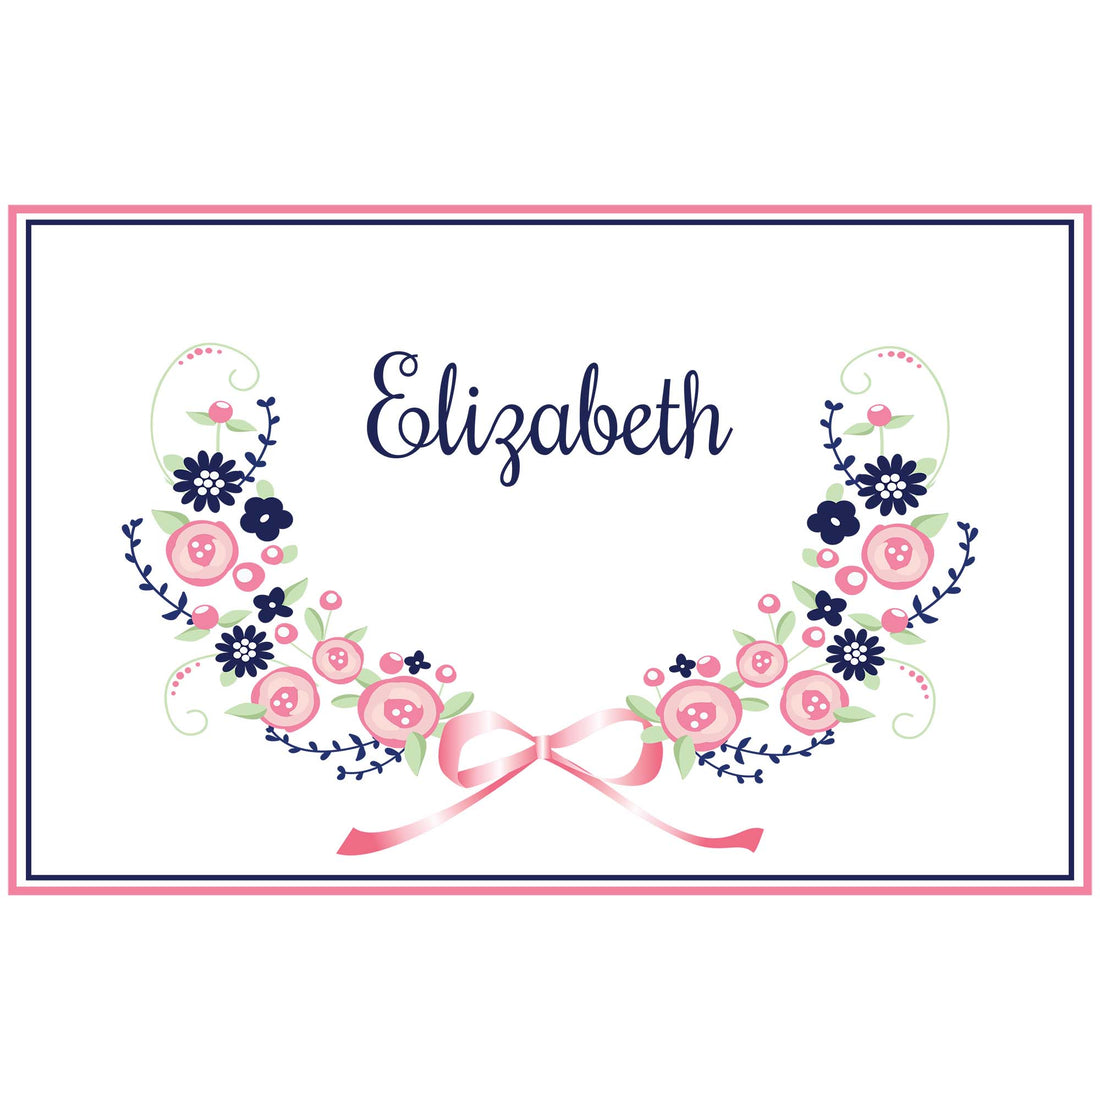 Personalized Placemat with Navy Pink Floral Garland design